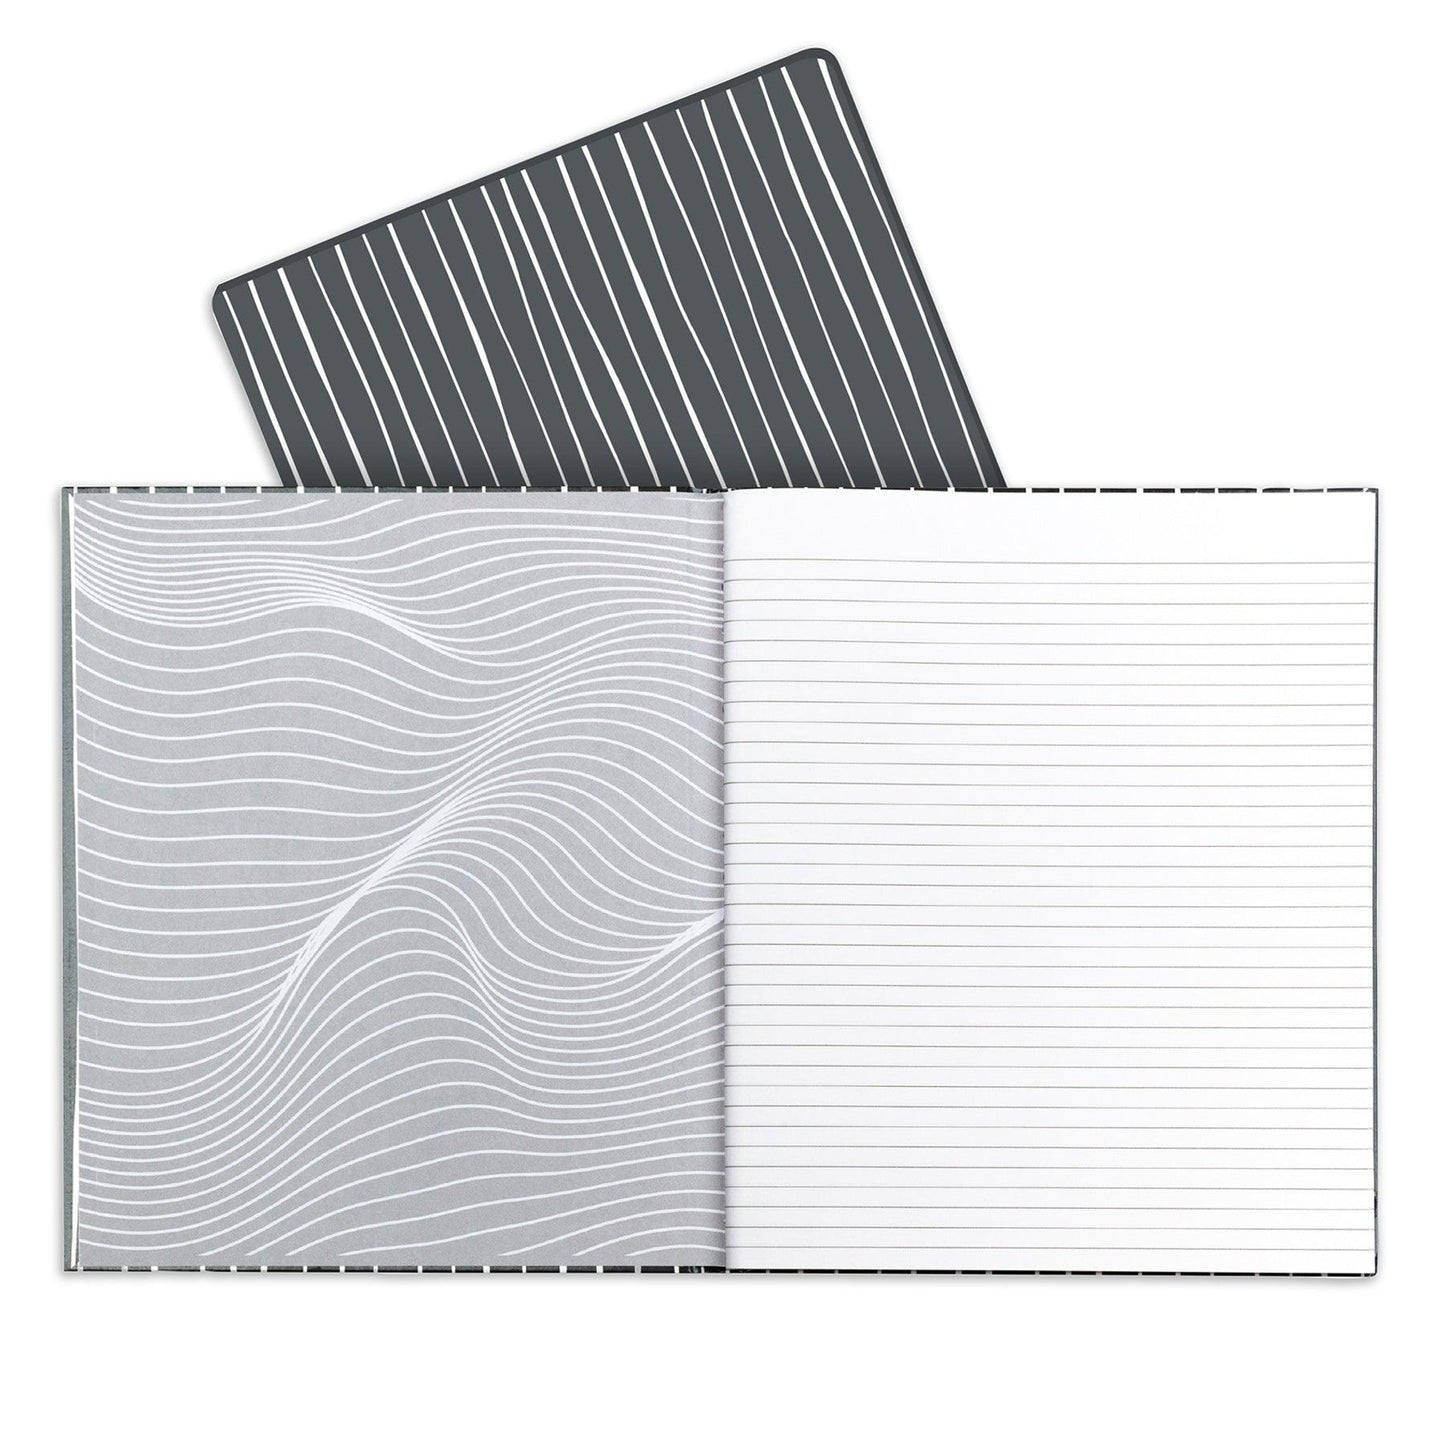 Professional Hardbound Notebook, 96 Page, College Ruled, 8-1/2" x 10-7/8", Charcoal & White Stripes, Pack of 2 - Loomini